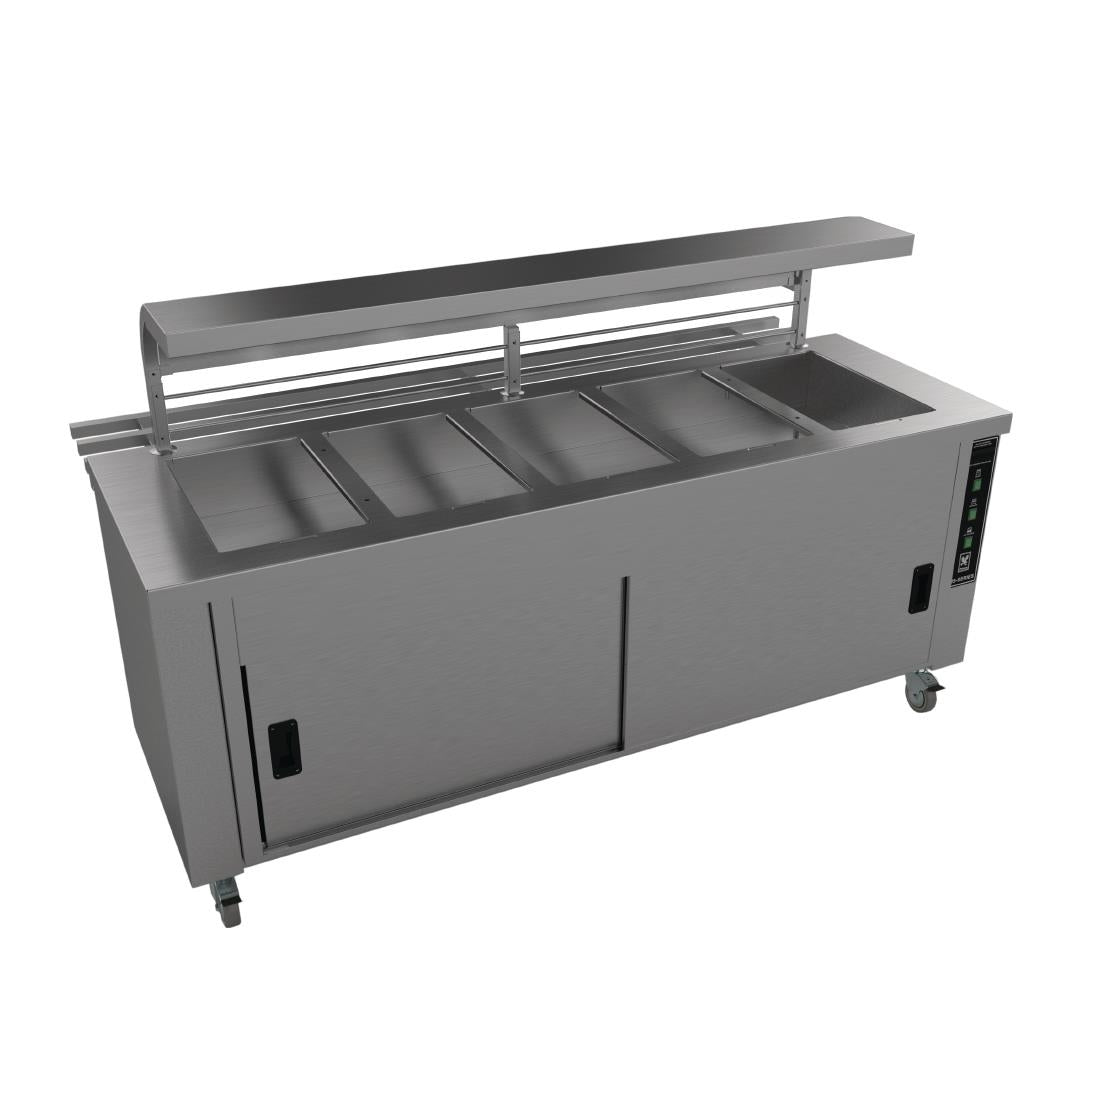 Falcon Chieftain 5 Well Heated Servery Counter with Trayslide HS5 JD Catering Equipment Solutions Ltd